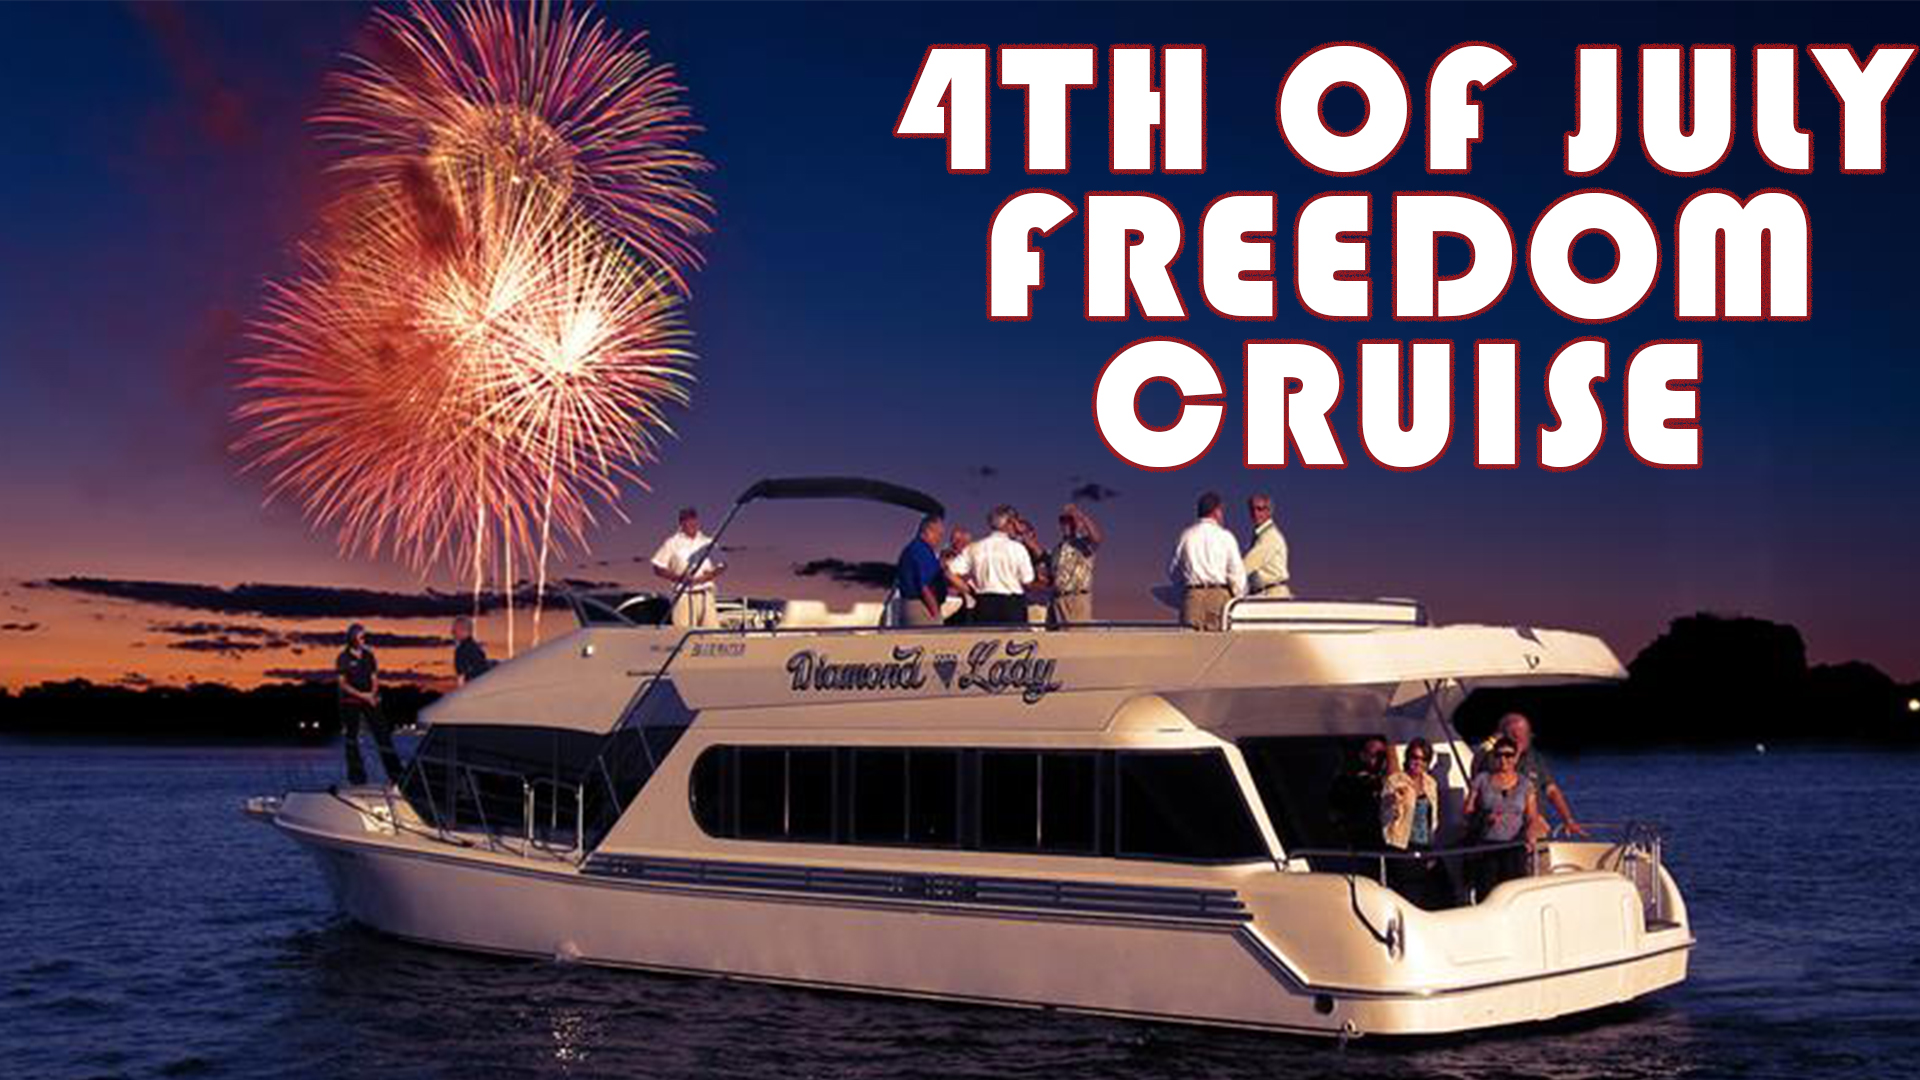  4TH OF JULY - FREEDOM CRUISE